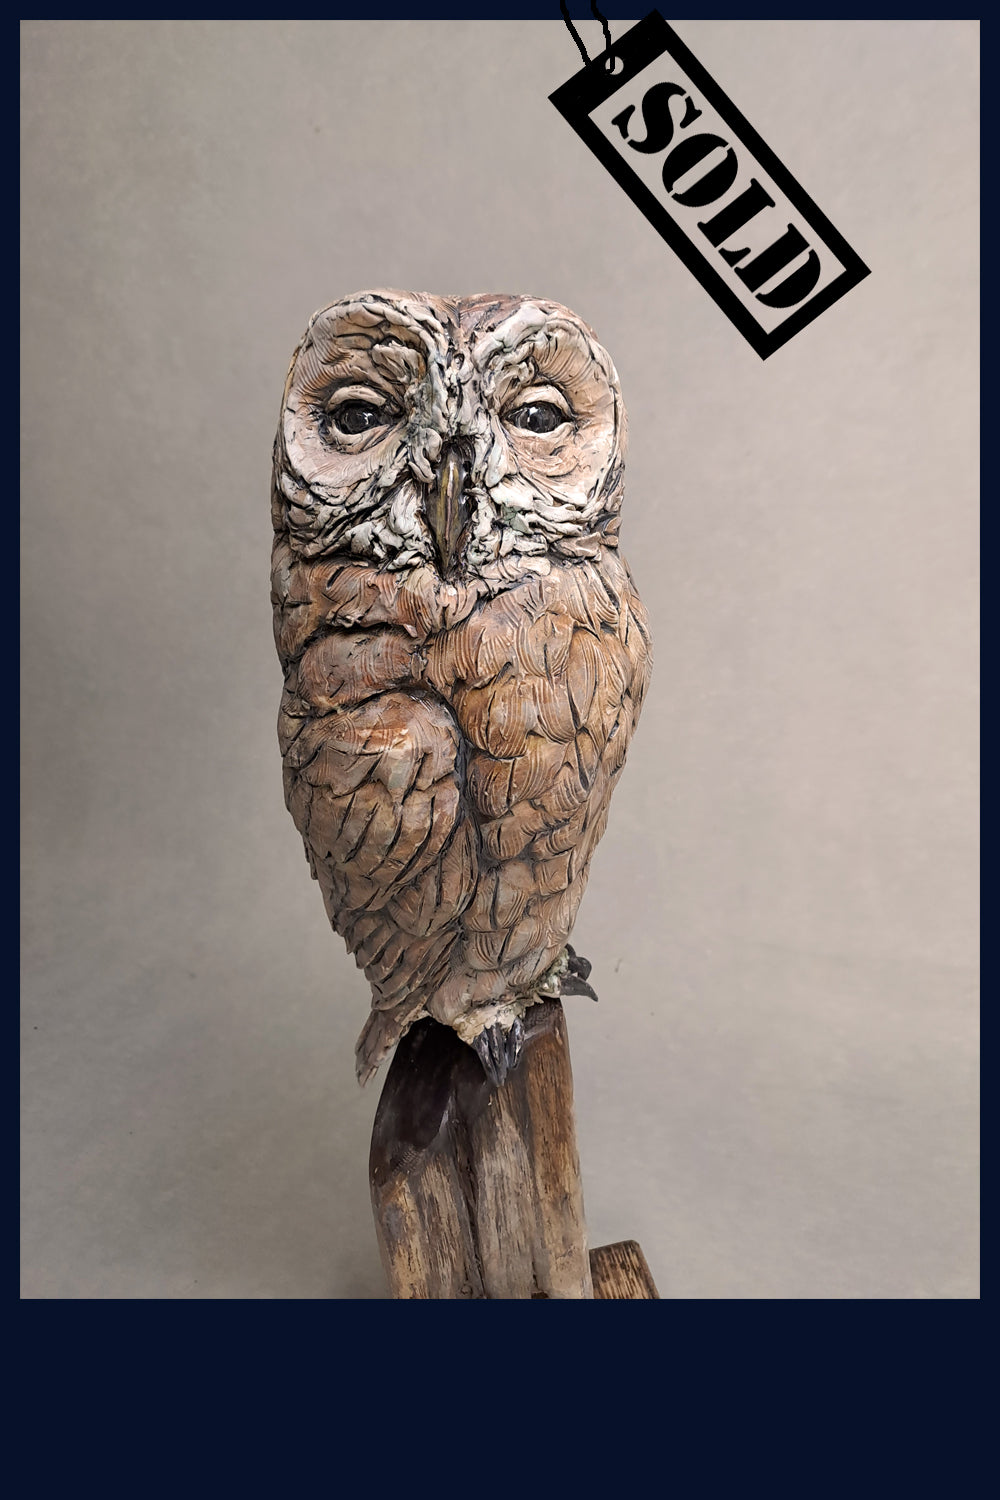 SOLD - Tawny Barn Owl Ceramic Sculpture by David Cooke